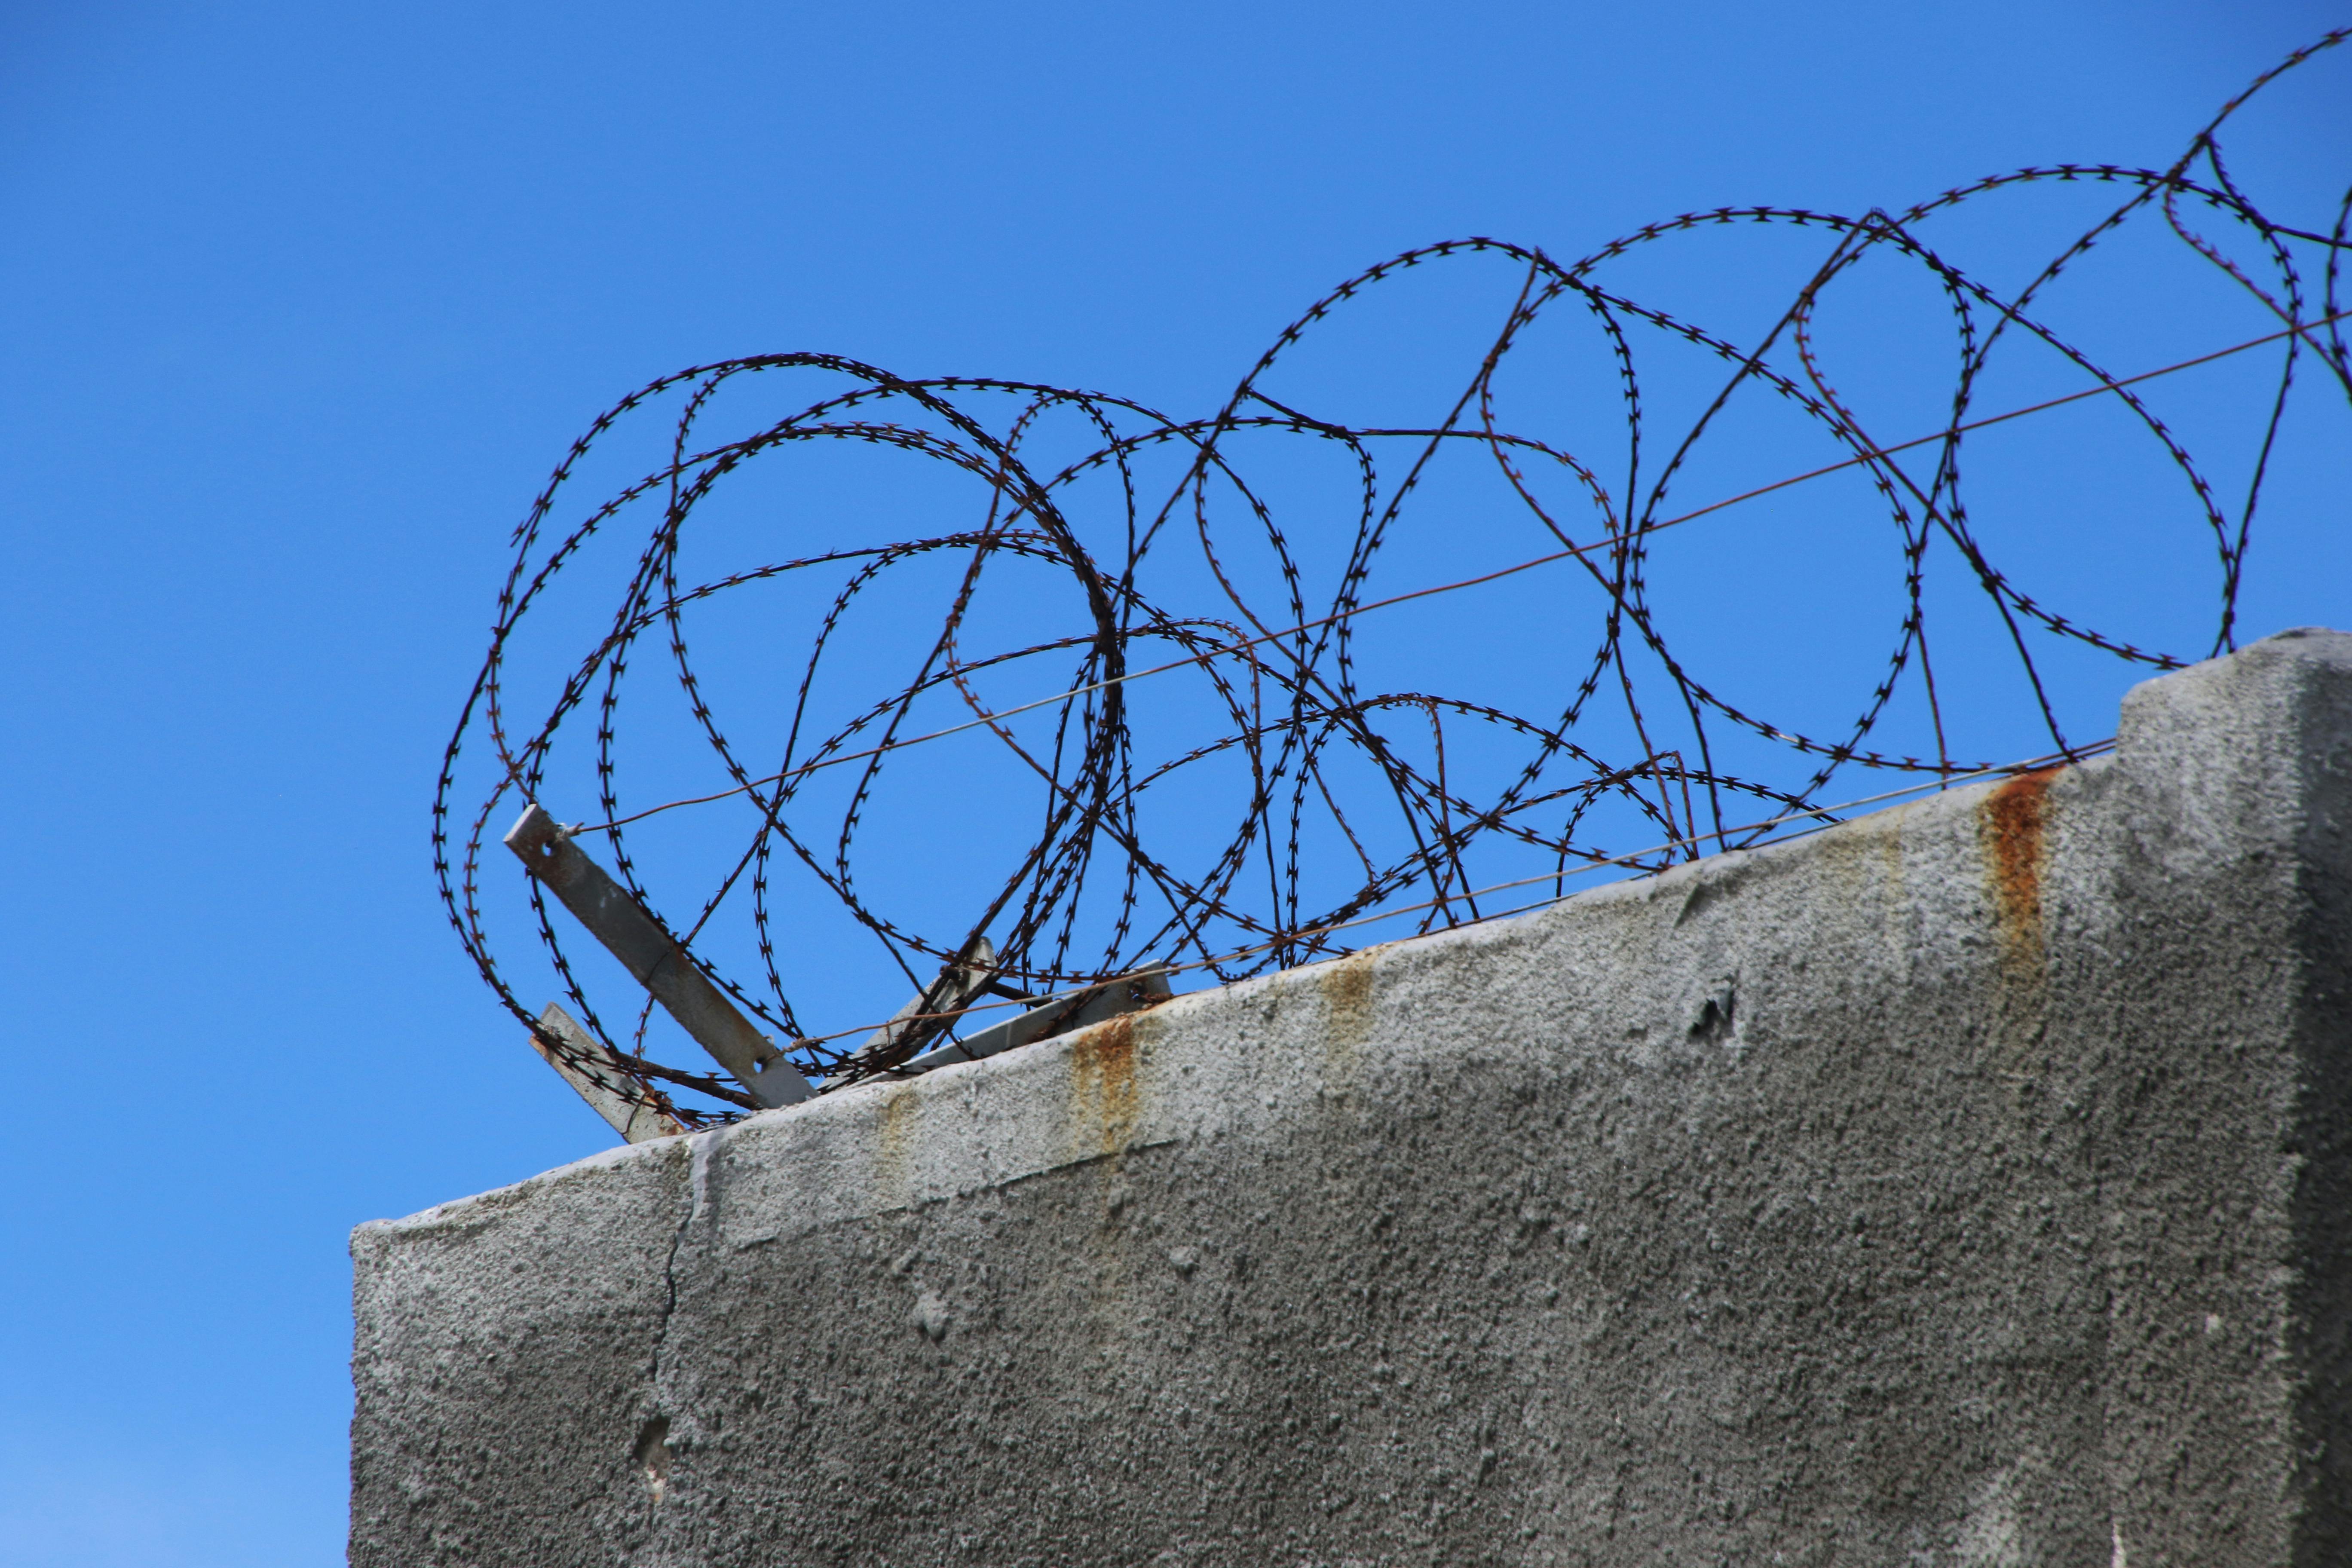 Free stock photo of barbed wire, buildings, Cape Town